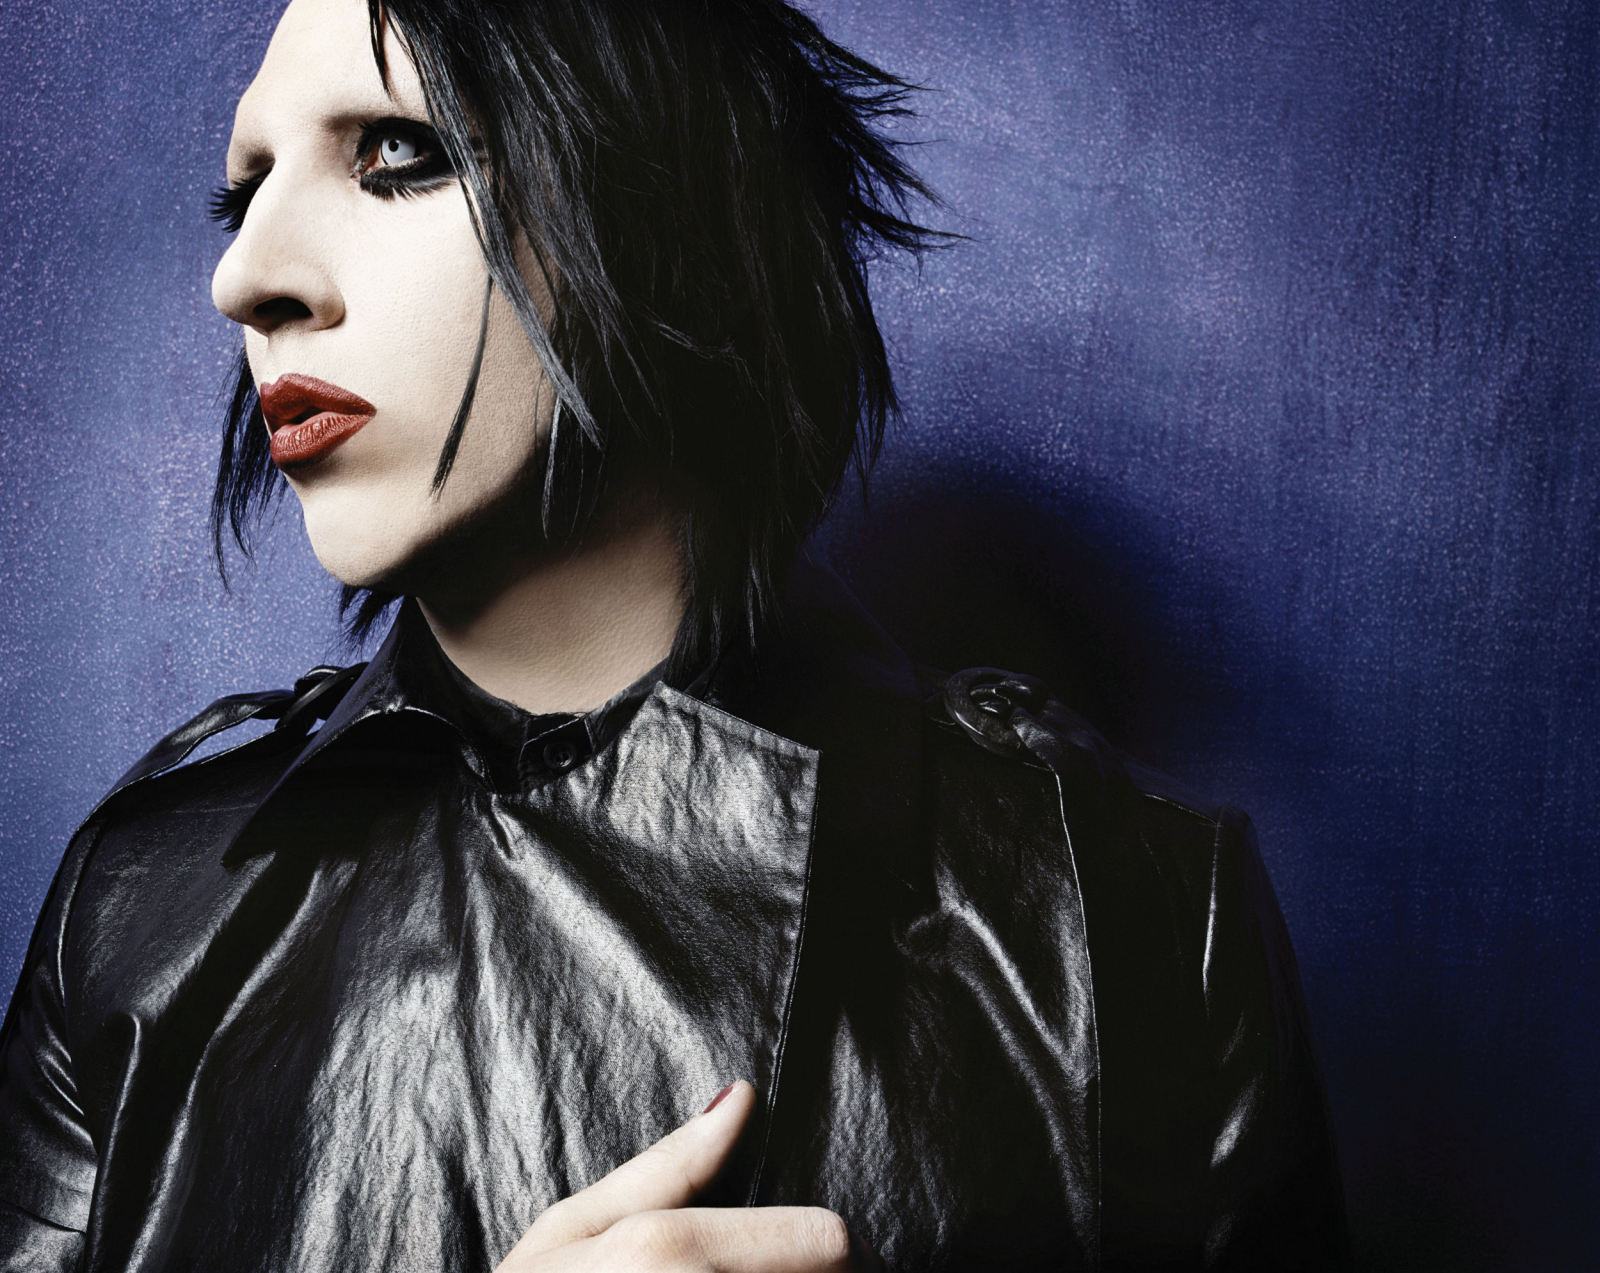 Marilyn Manson photo 14 of 53 pics, wallpaper - photo #87705 - ThePlace21600 x 1273